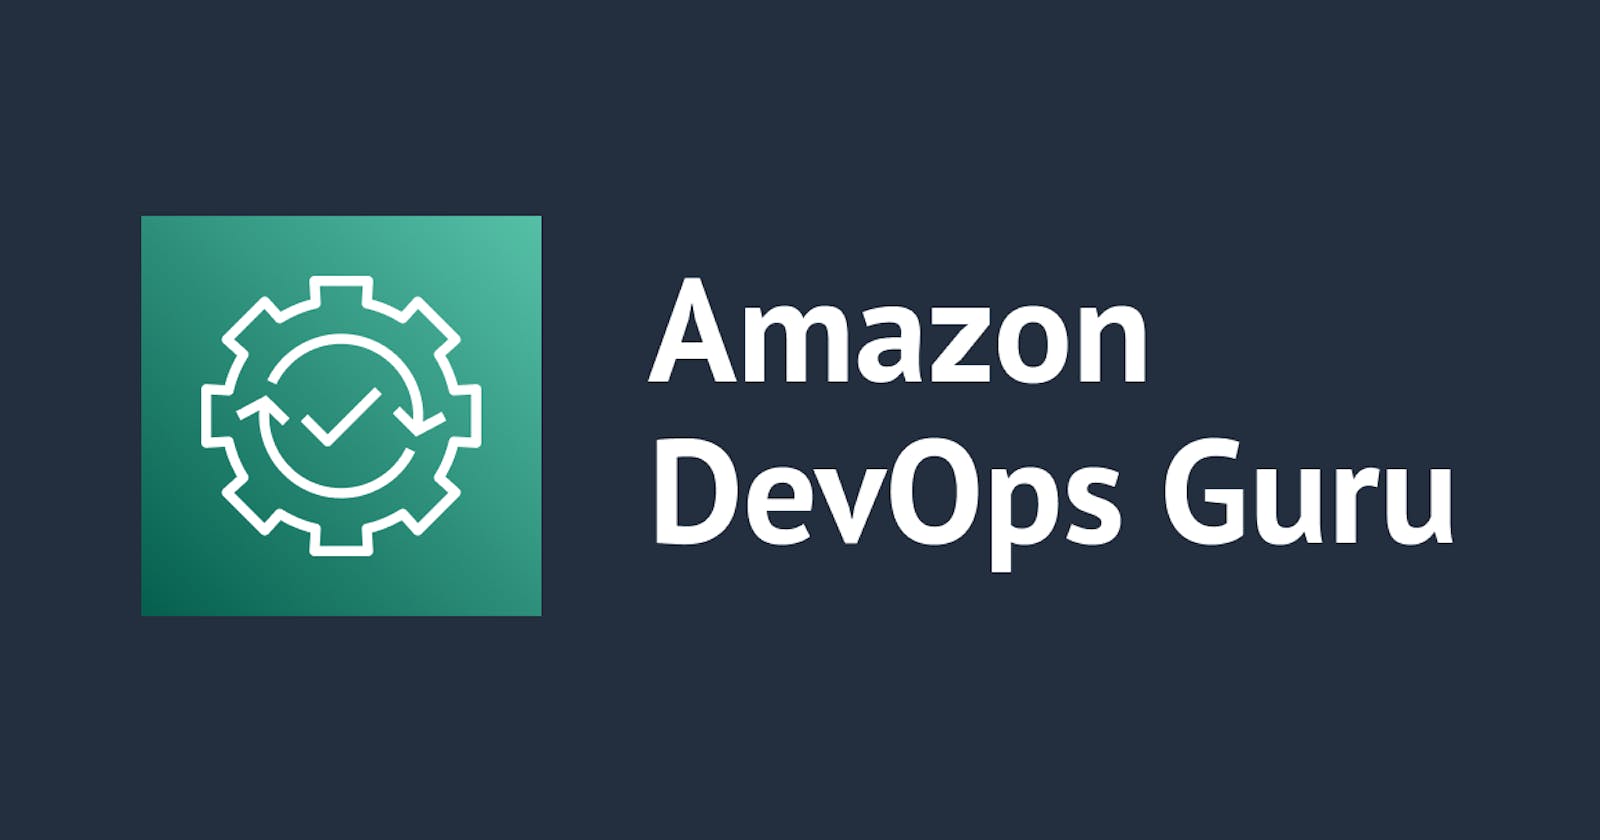 Demystifying AWS DevOps Guru: A Simple Guide to Get Started